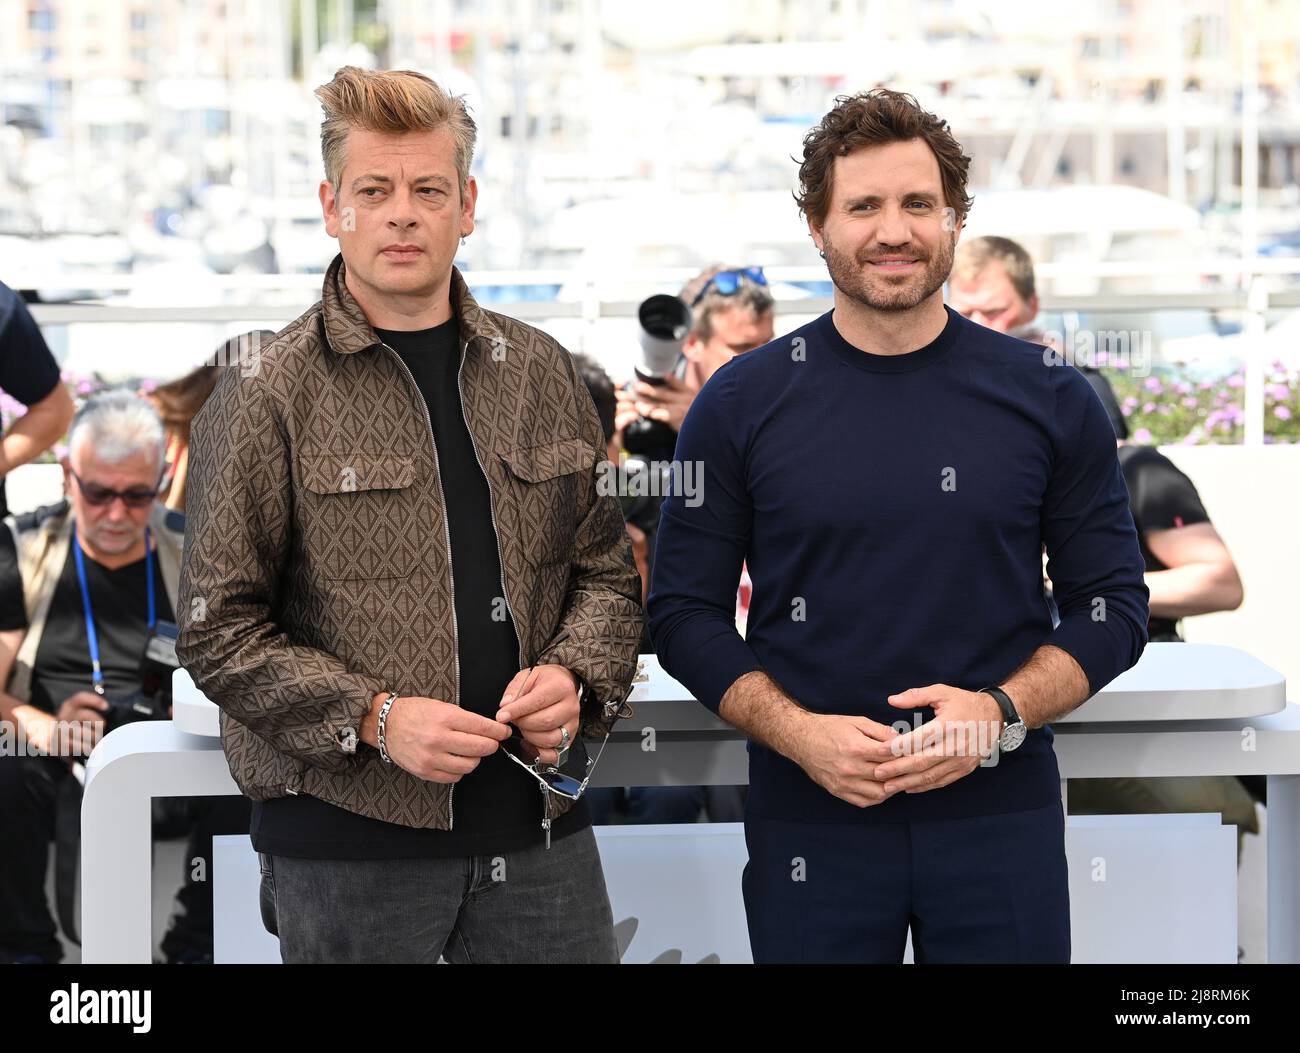 Cannes, France. 18th May, 2022. May 18th, 2022. Cannes, France. Benjamin Biolay and Edgar Ramirez attending the Un Certain Regard Jury photocall, part of the 75th Cannes Film Festival, Palais de Festival, Cannes. Credit: Doug Peters/Alamy Live News Stock Photo